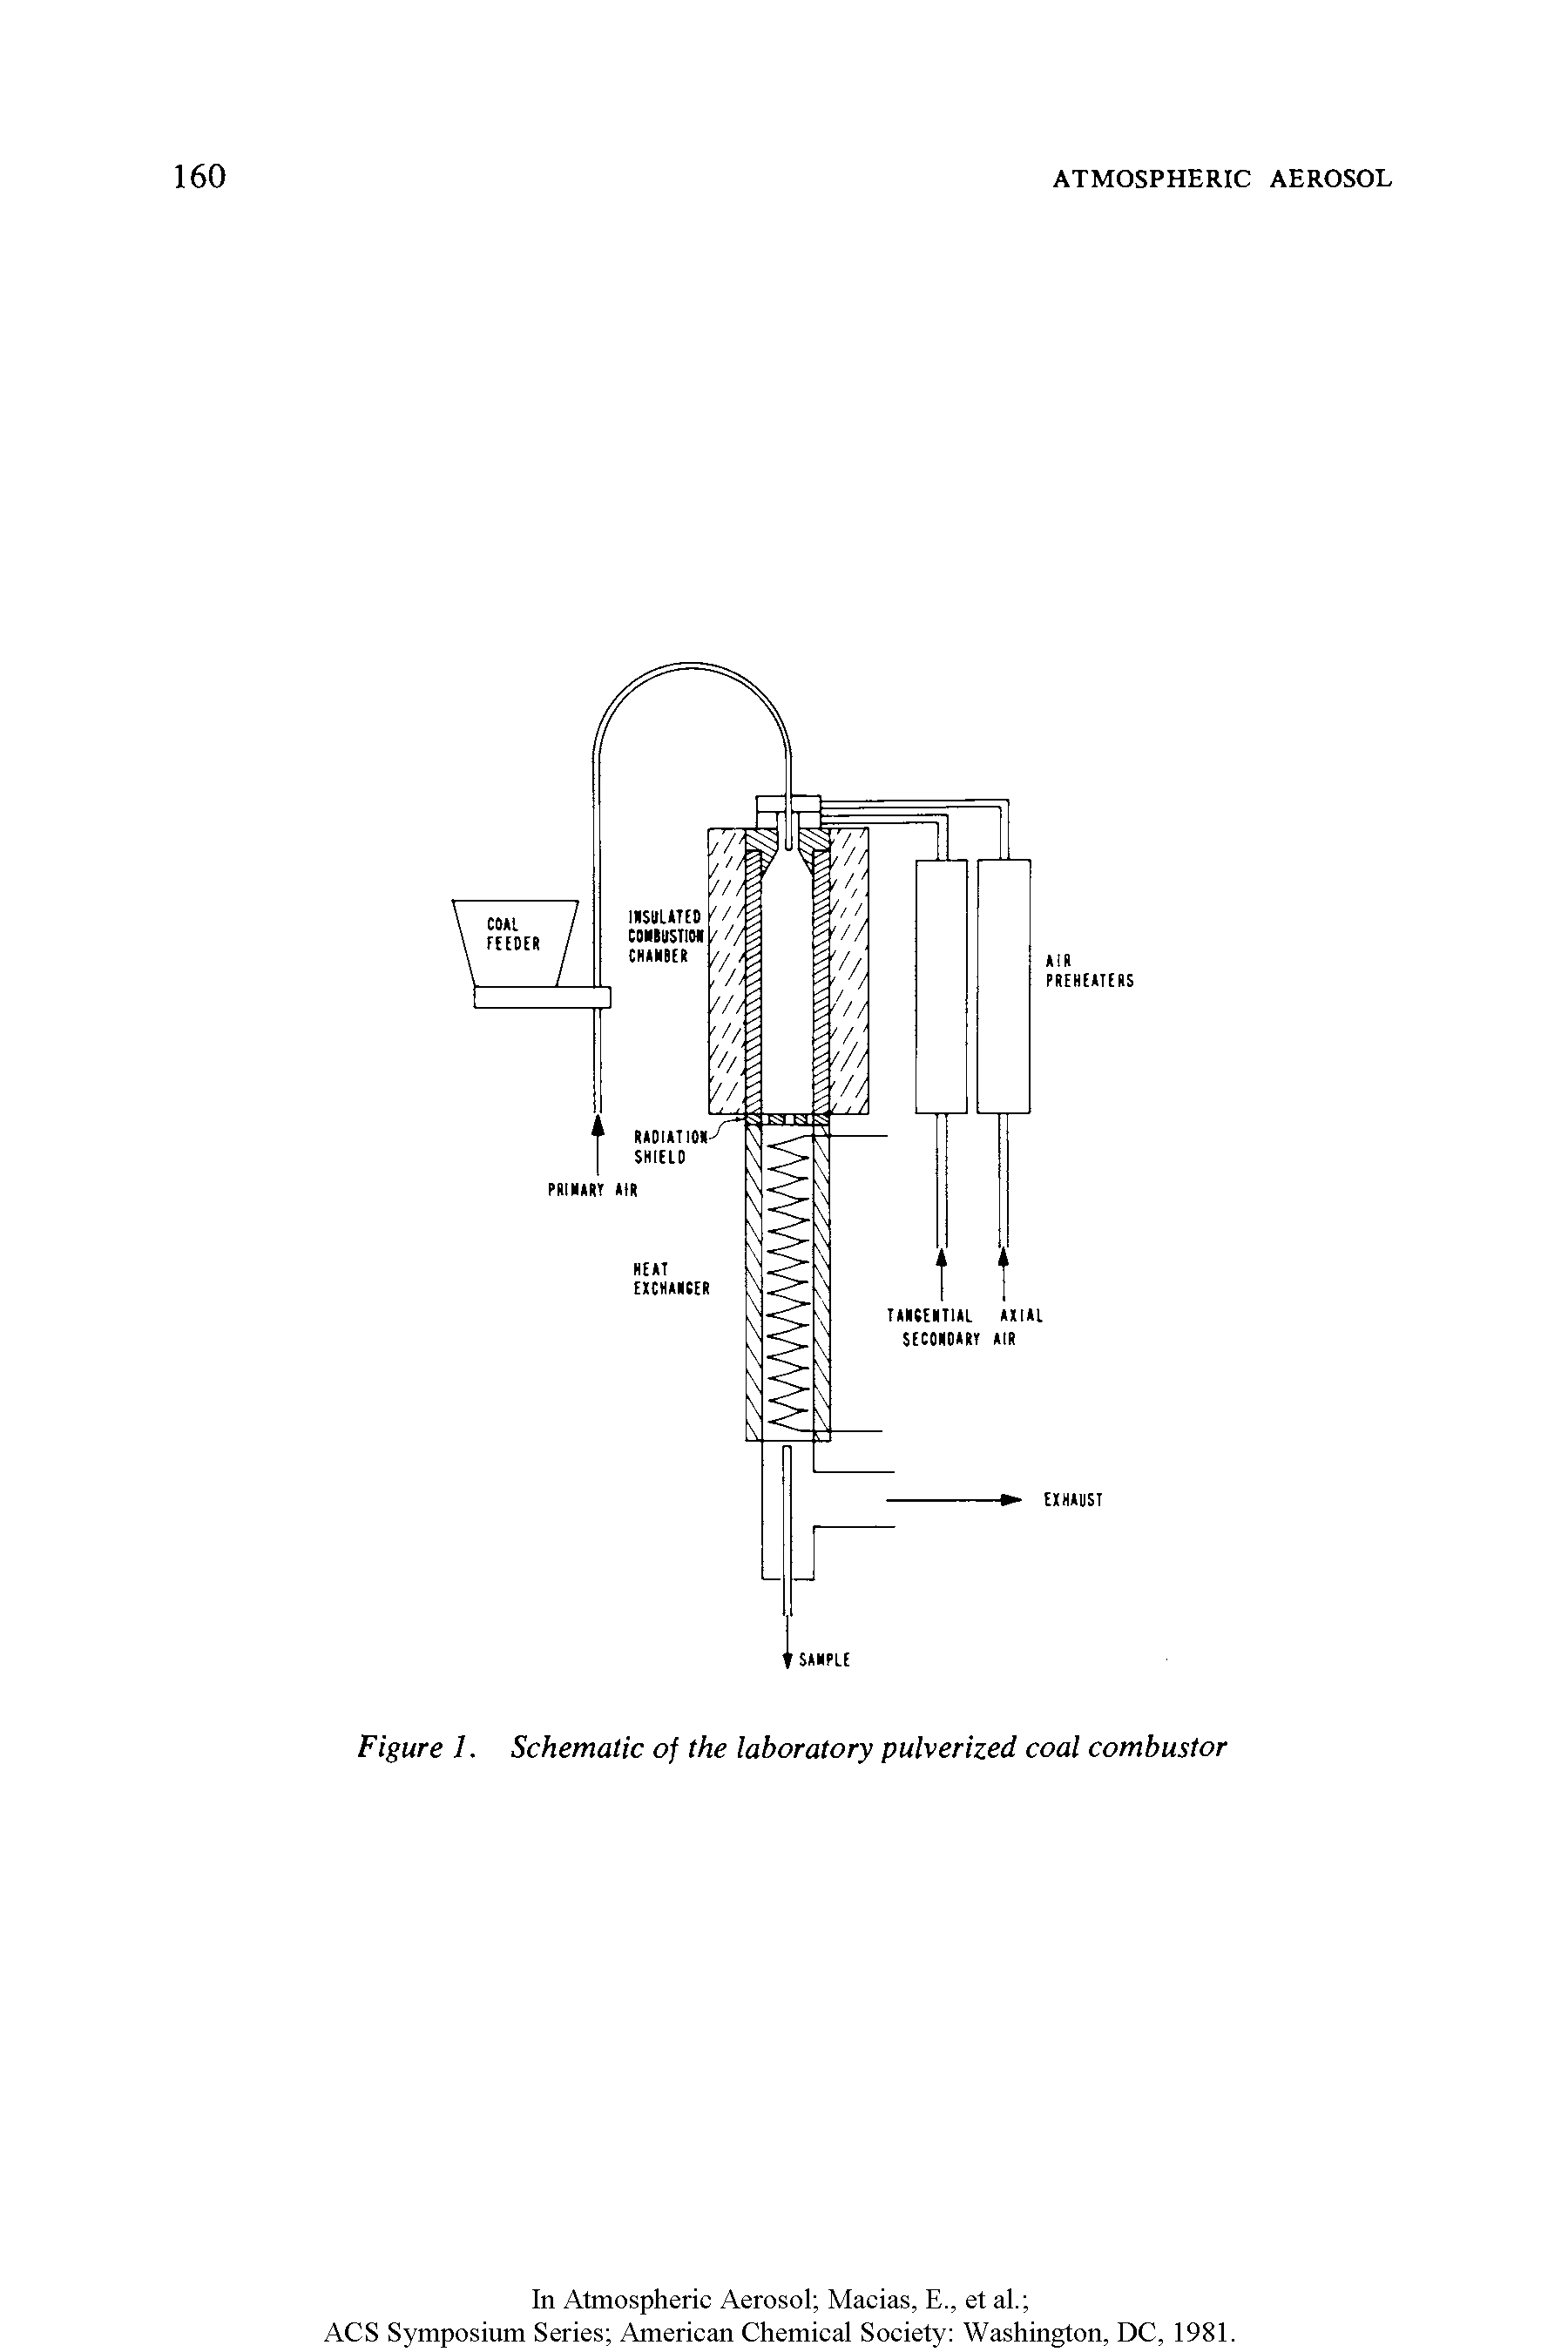 Figure 1. Schematic of the laboratory pulverized coal combustor...